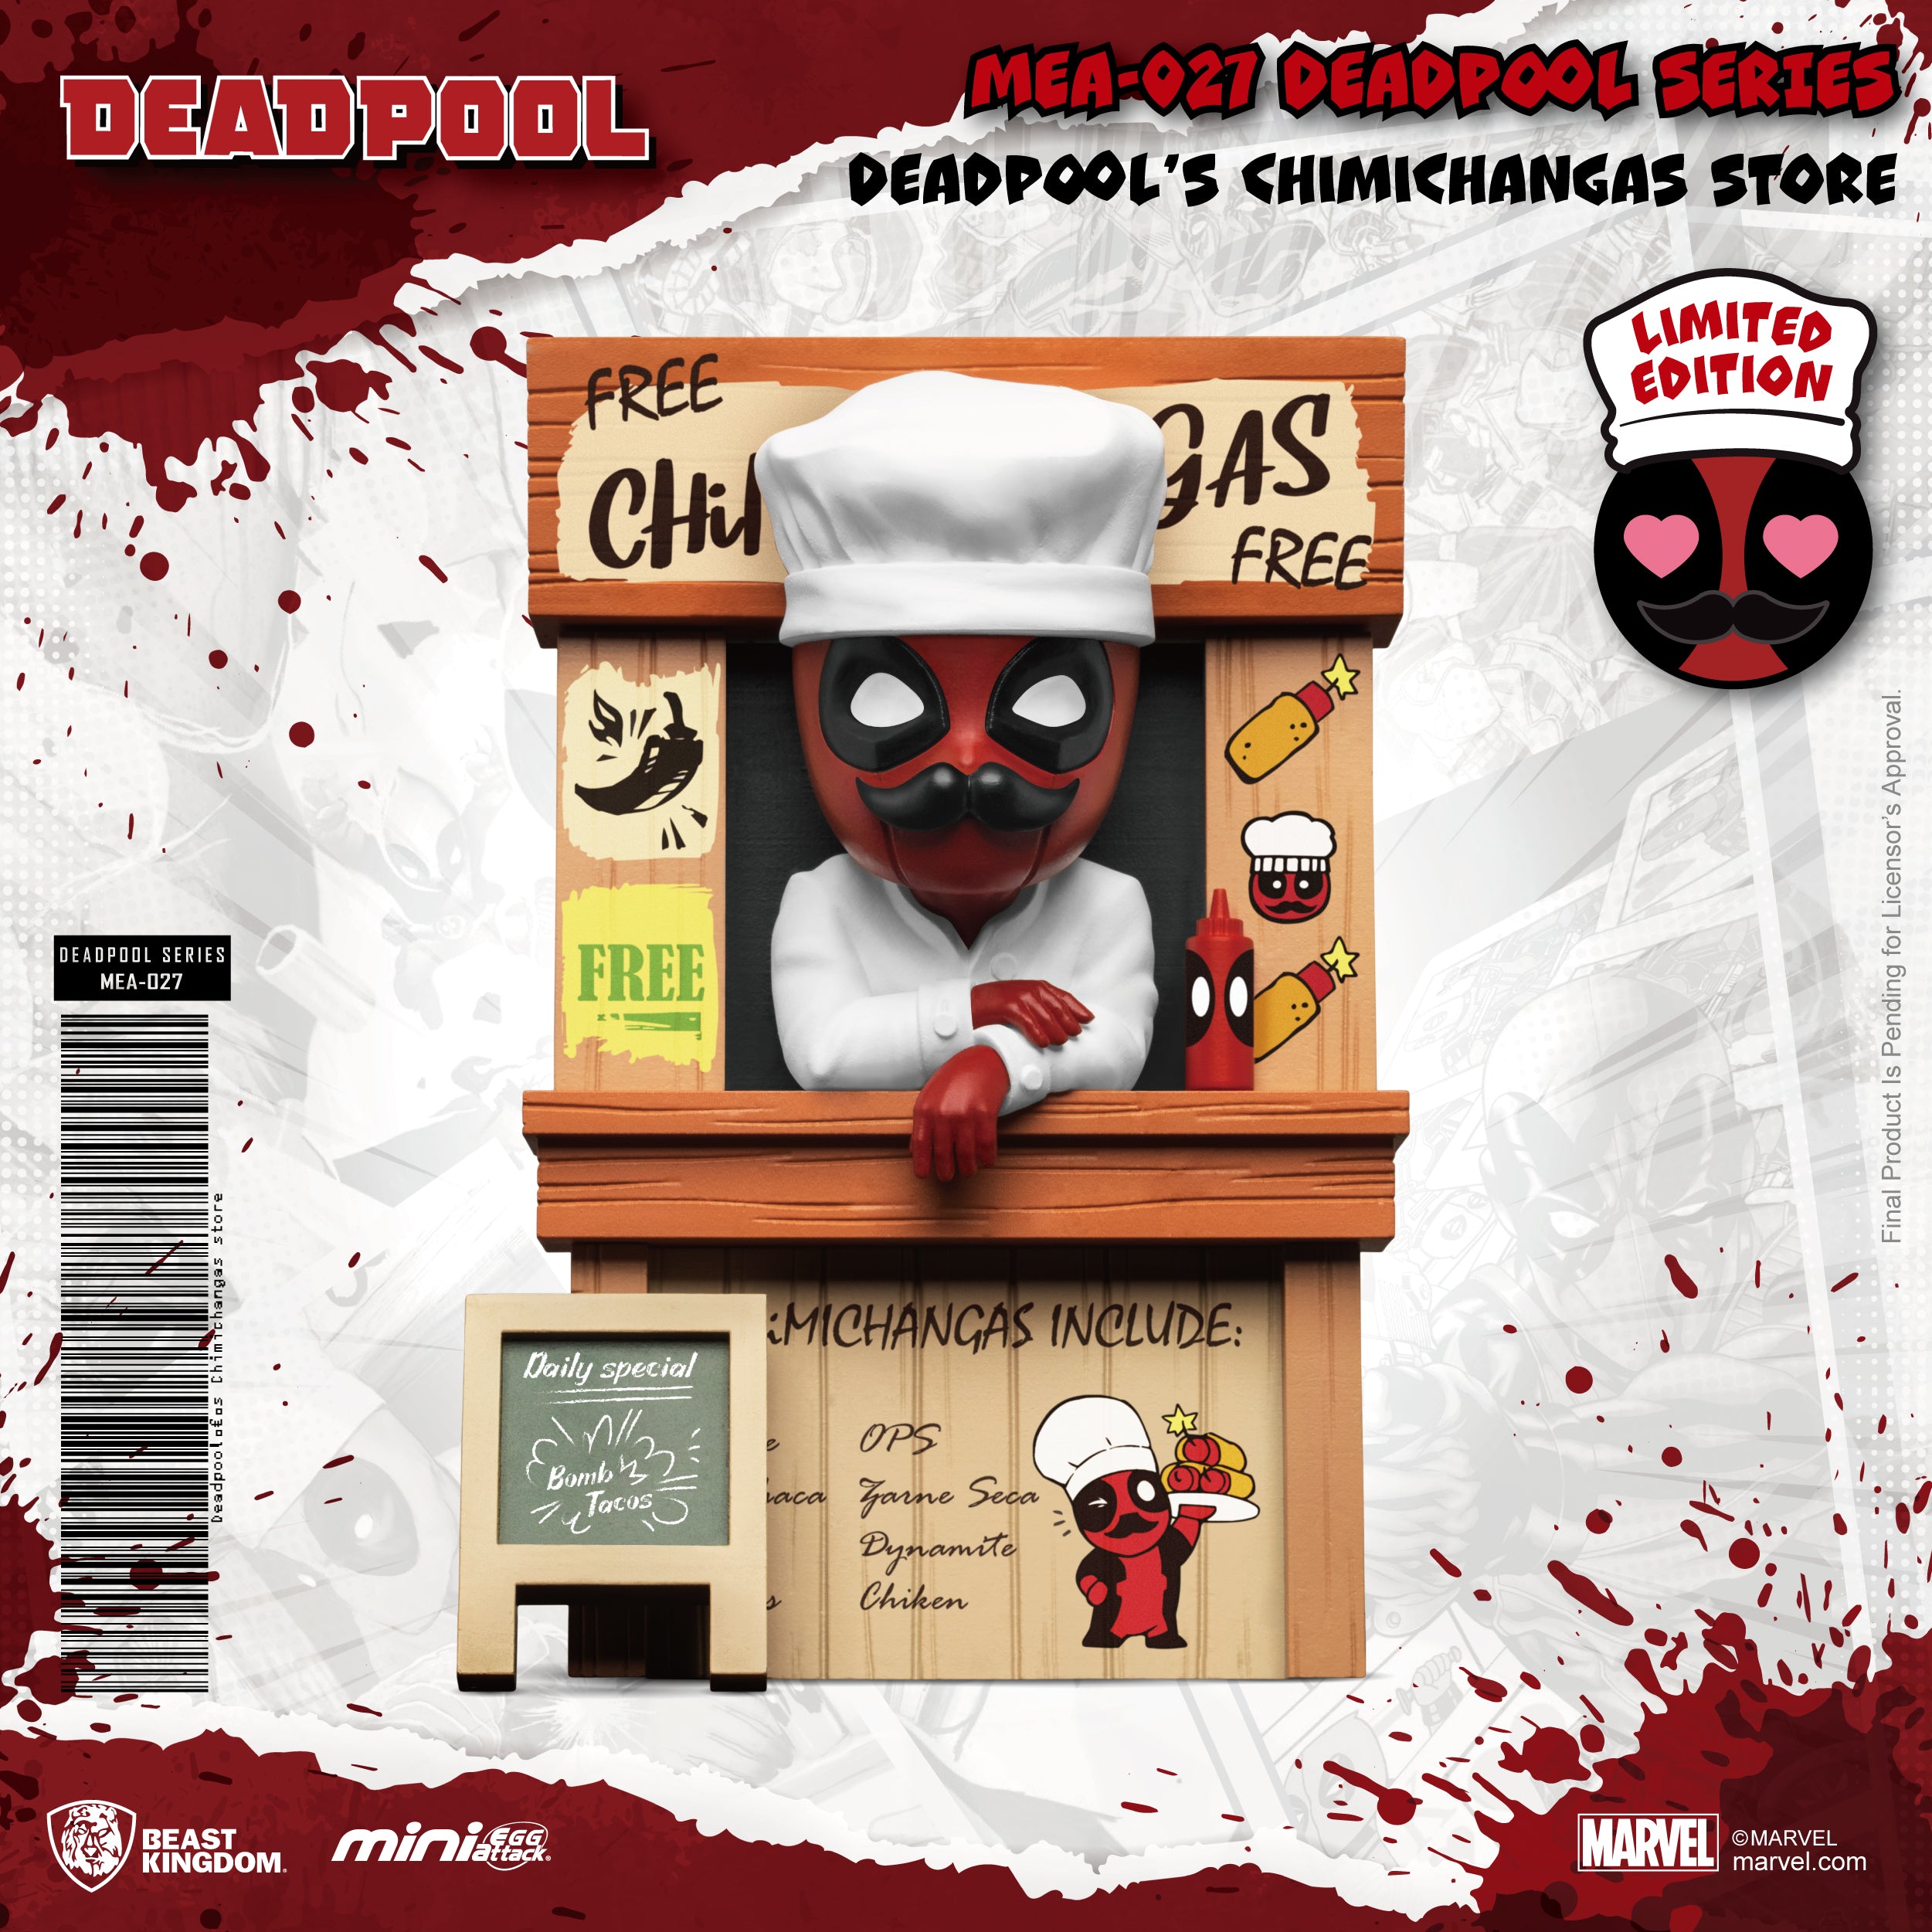 Deadpool with Chimichanga 349 - 7-Eleven Exclusive [Damaged: 6.5/10]